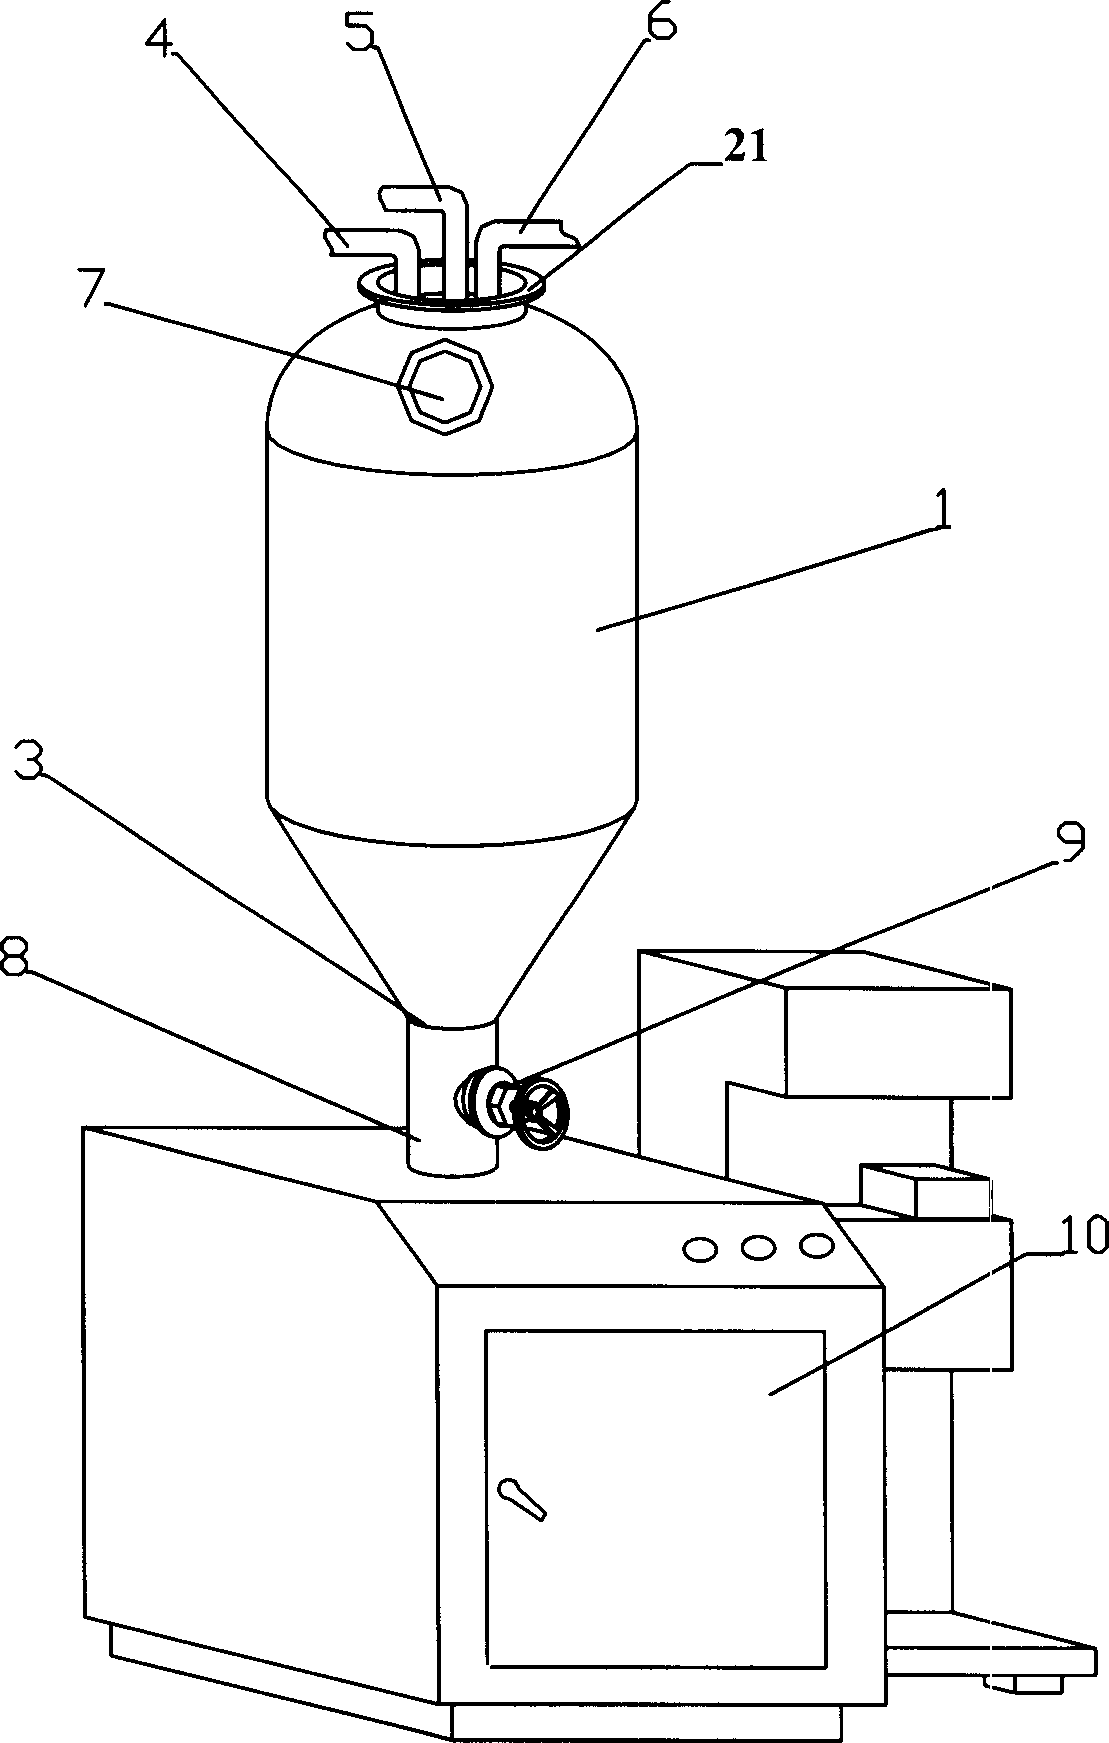 Slow releasing water producing method and apparatus